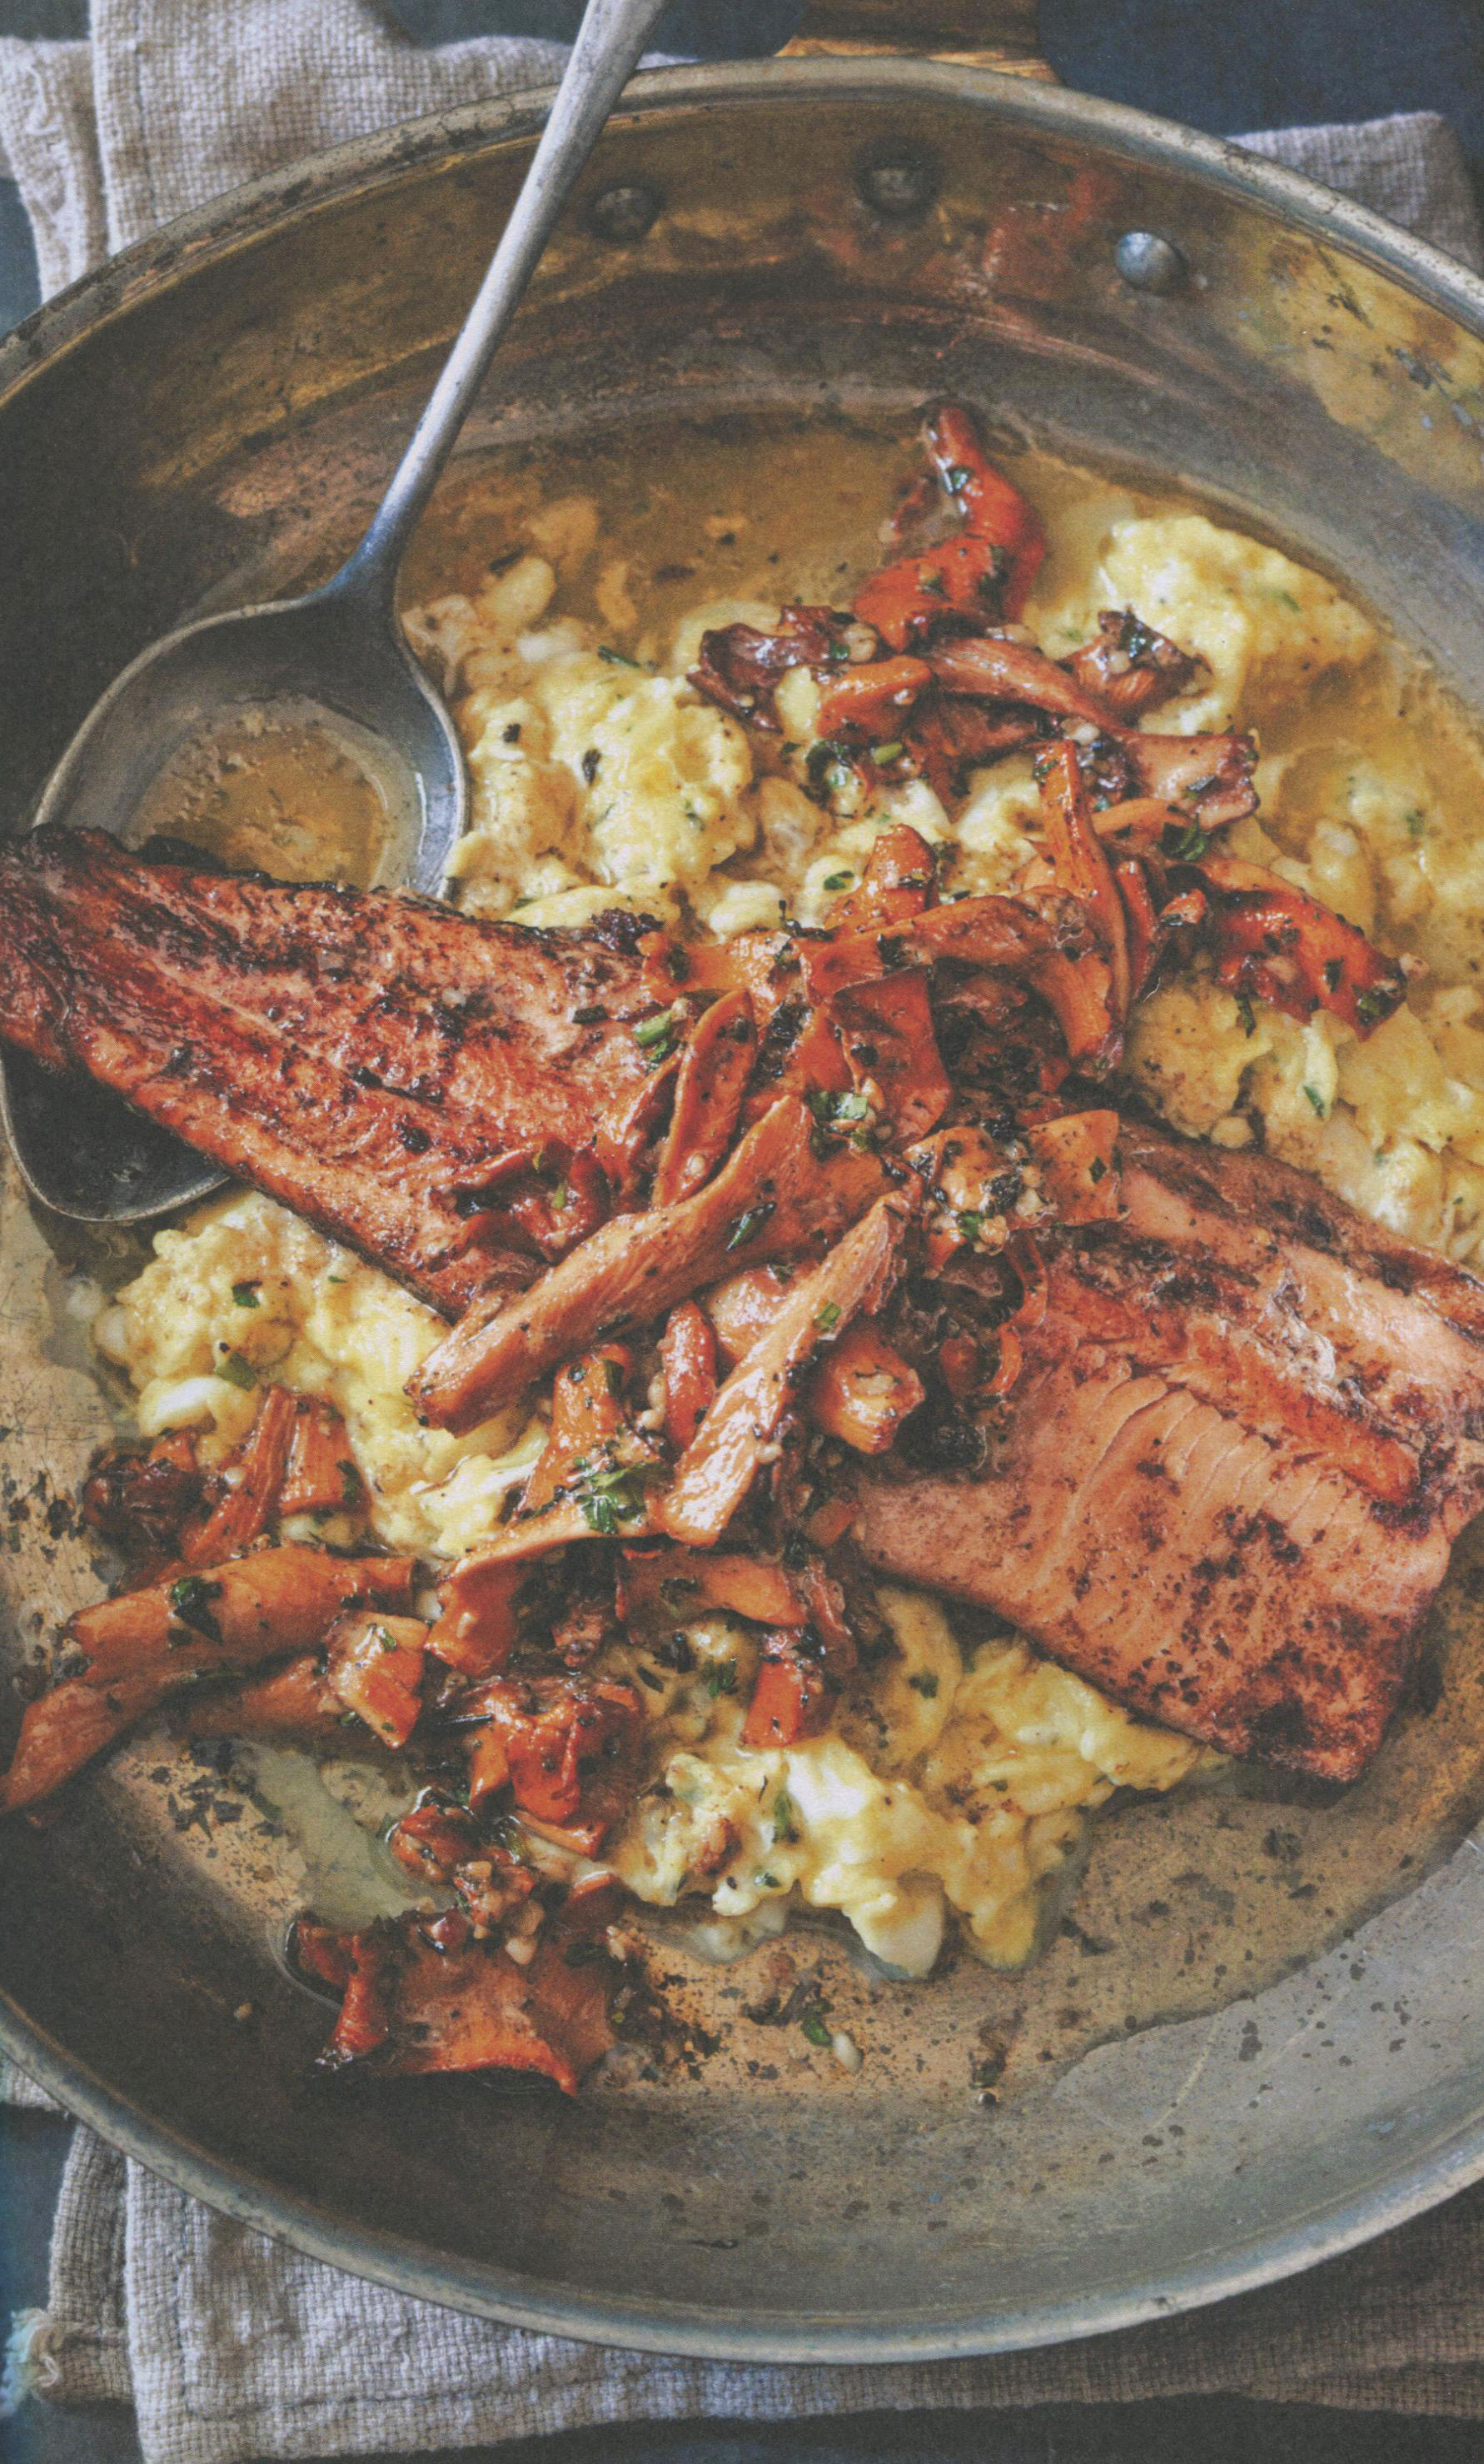 Sautéed Trout, Soft Scrambled Eggs, Chanterelle Mushrooms from Big Bad Breakfast by John Currence